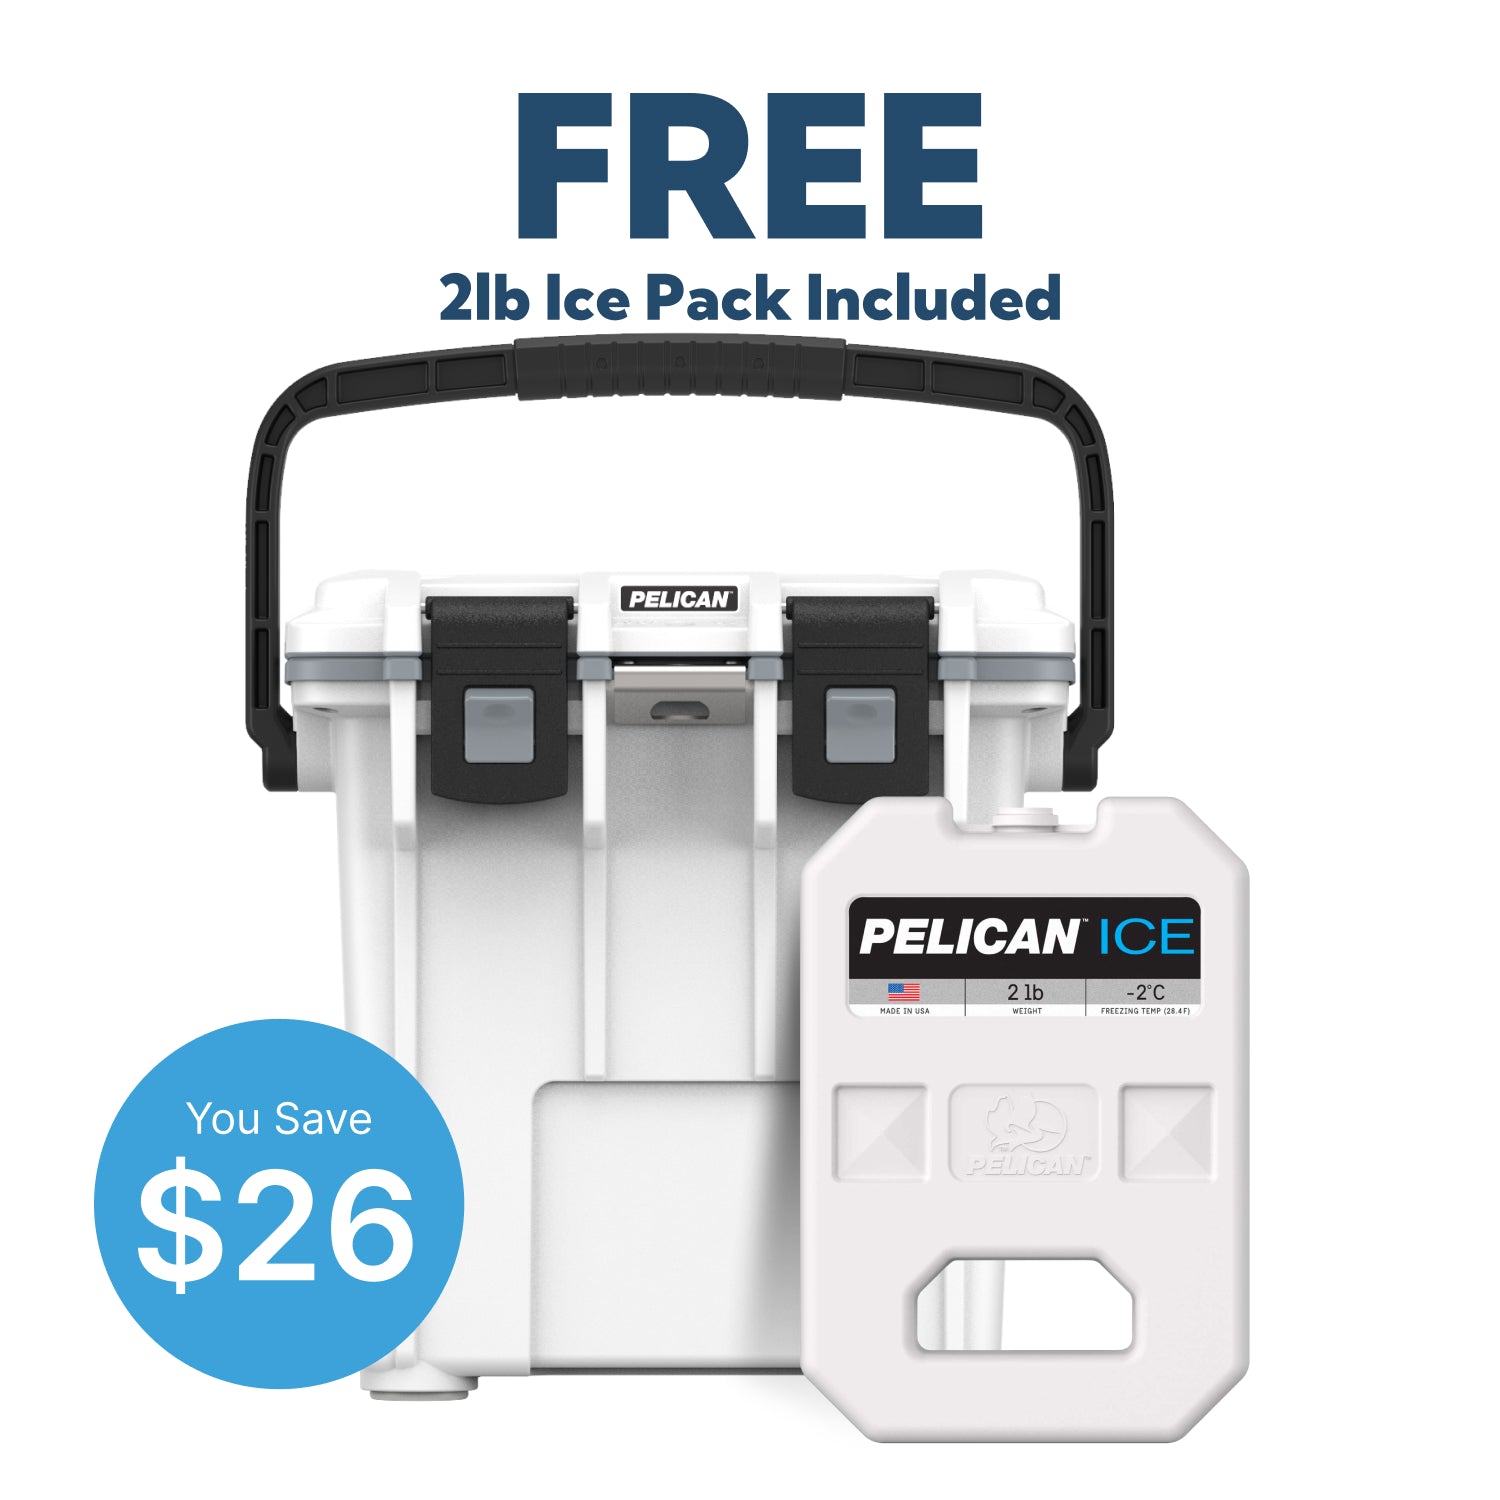 White / Grey Pelican 20QT Cooler With Free 2lb Ice Pack